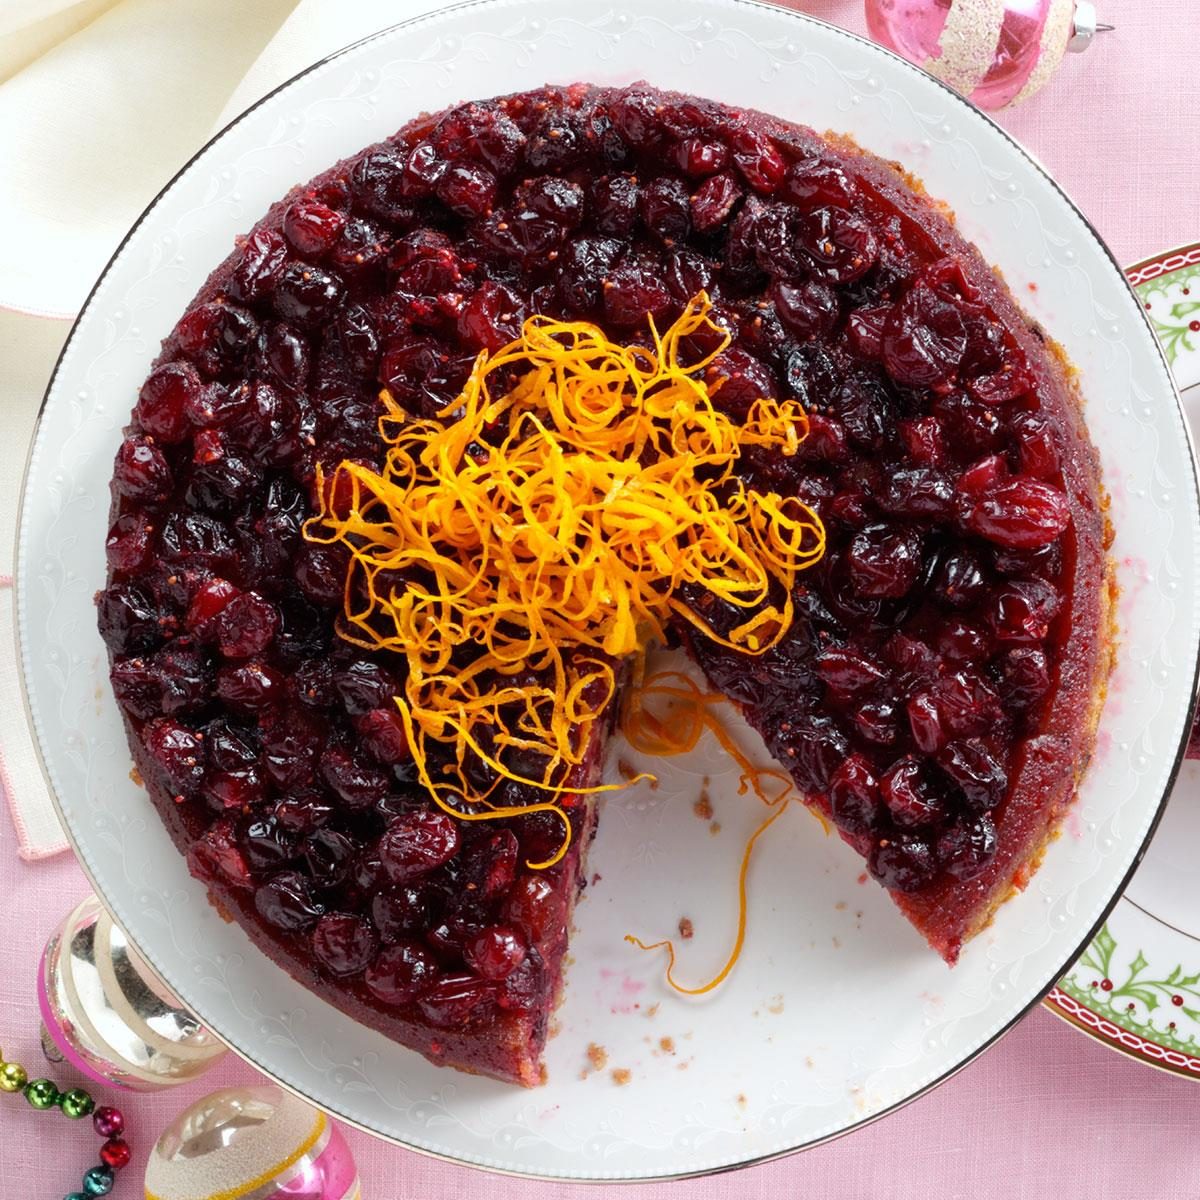 Cranberry Pudding Recipe How to Make It